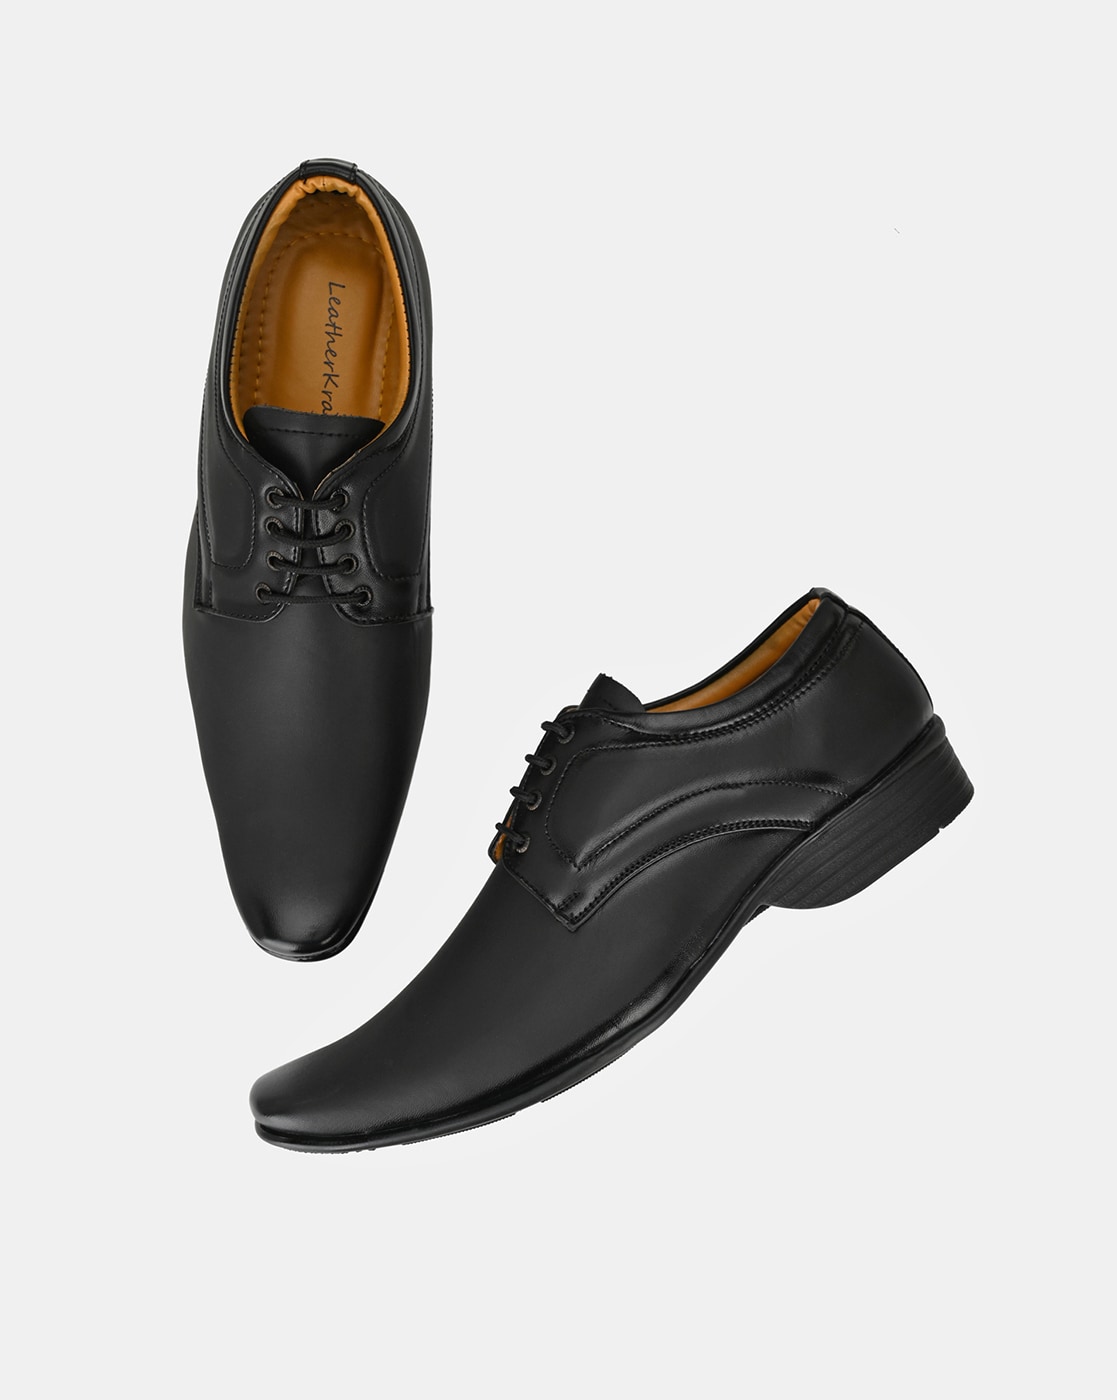 Buy Shoes'n'Style Black Less-up Men Formal Shoes at Amazon.in